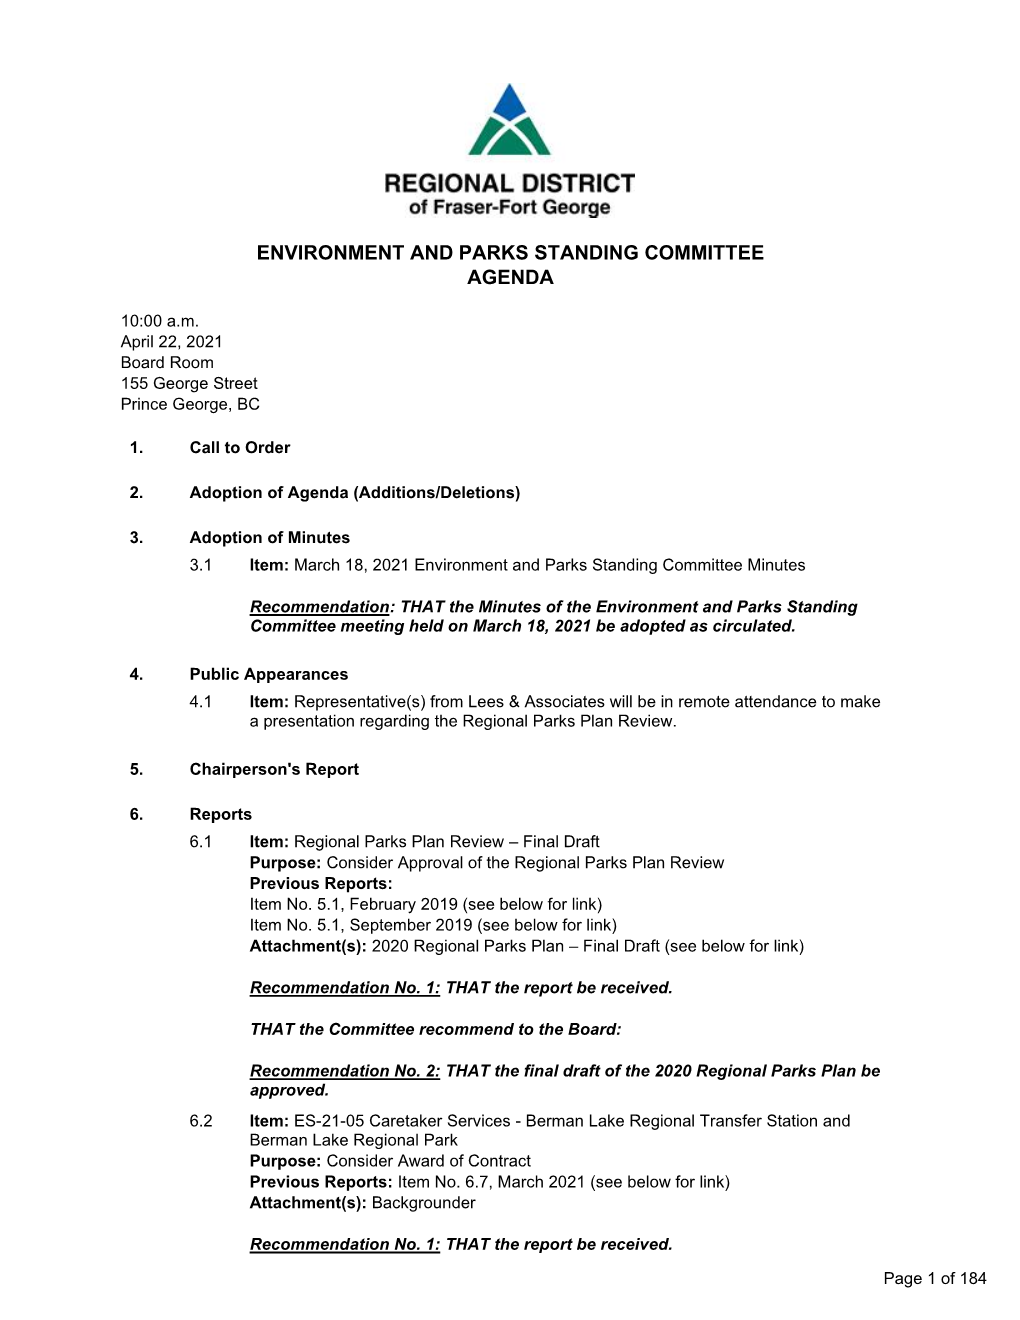 Environment and Parks Standing Committee Agenda